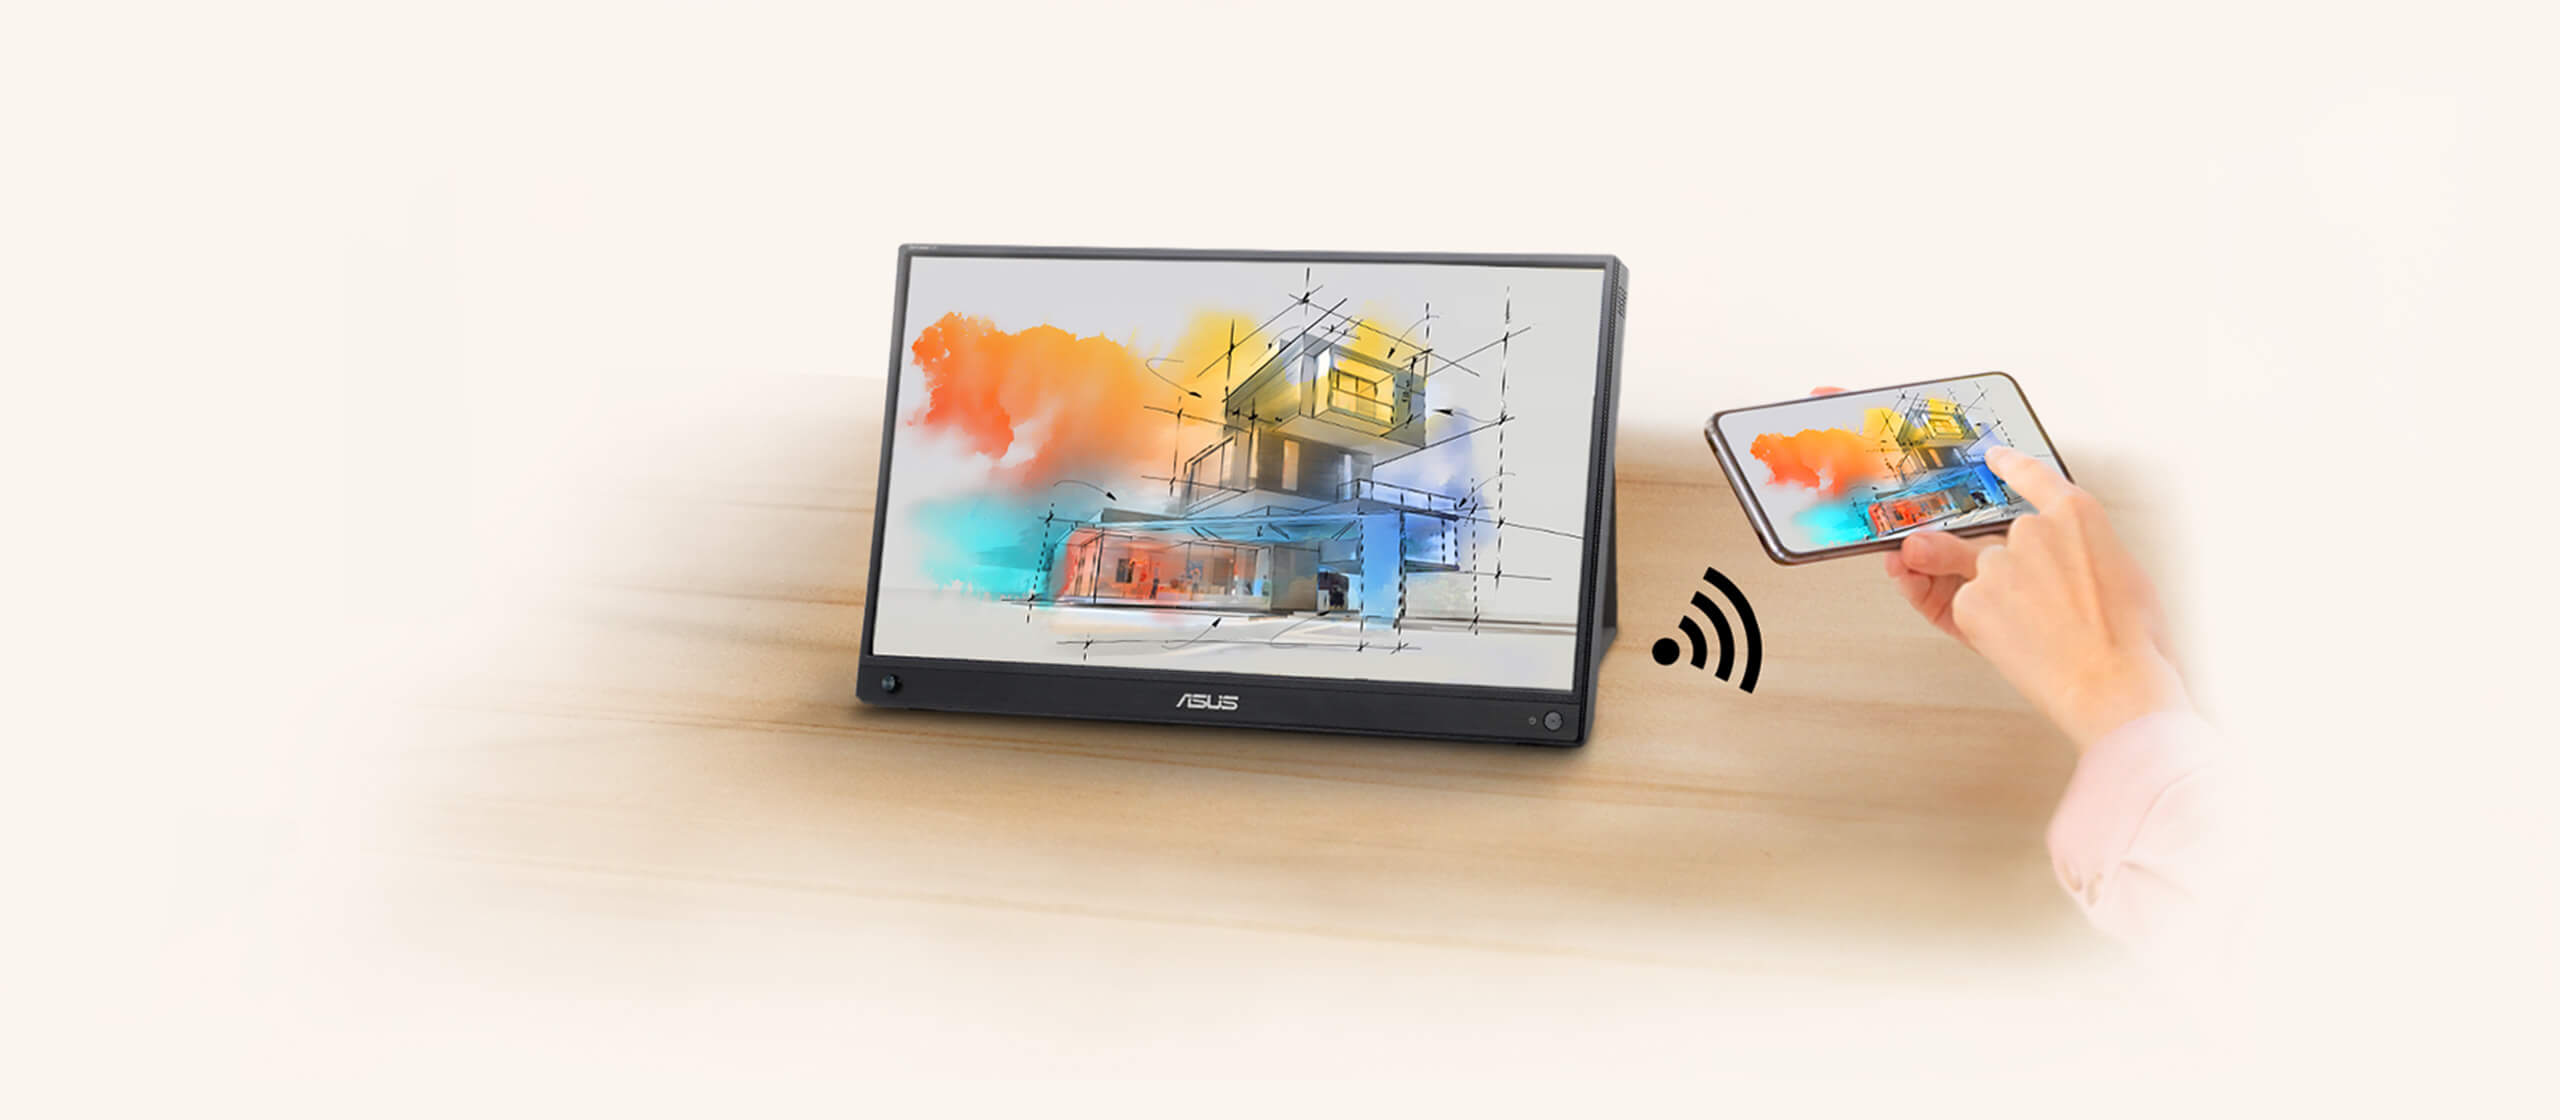 ZenScreen Go MB16AWP enables wireless mirroring support with smartphones.